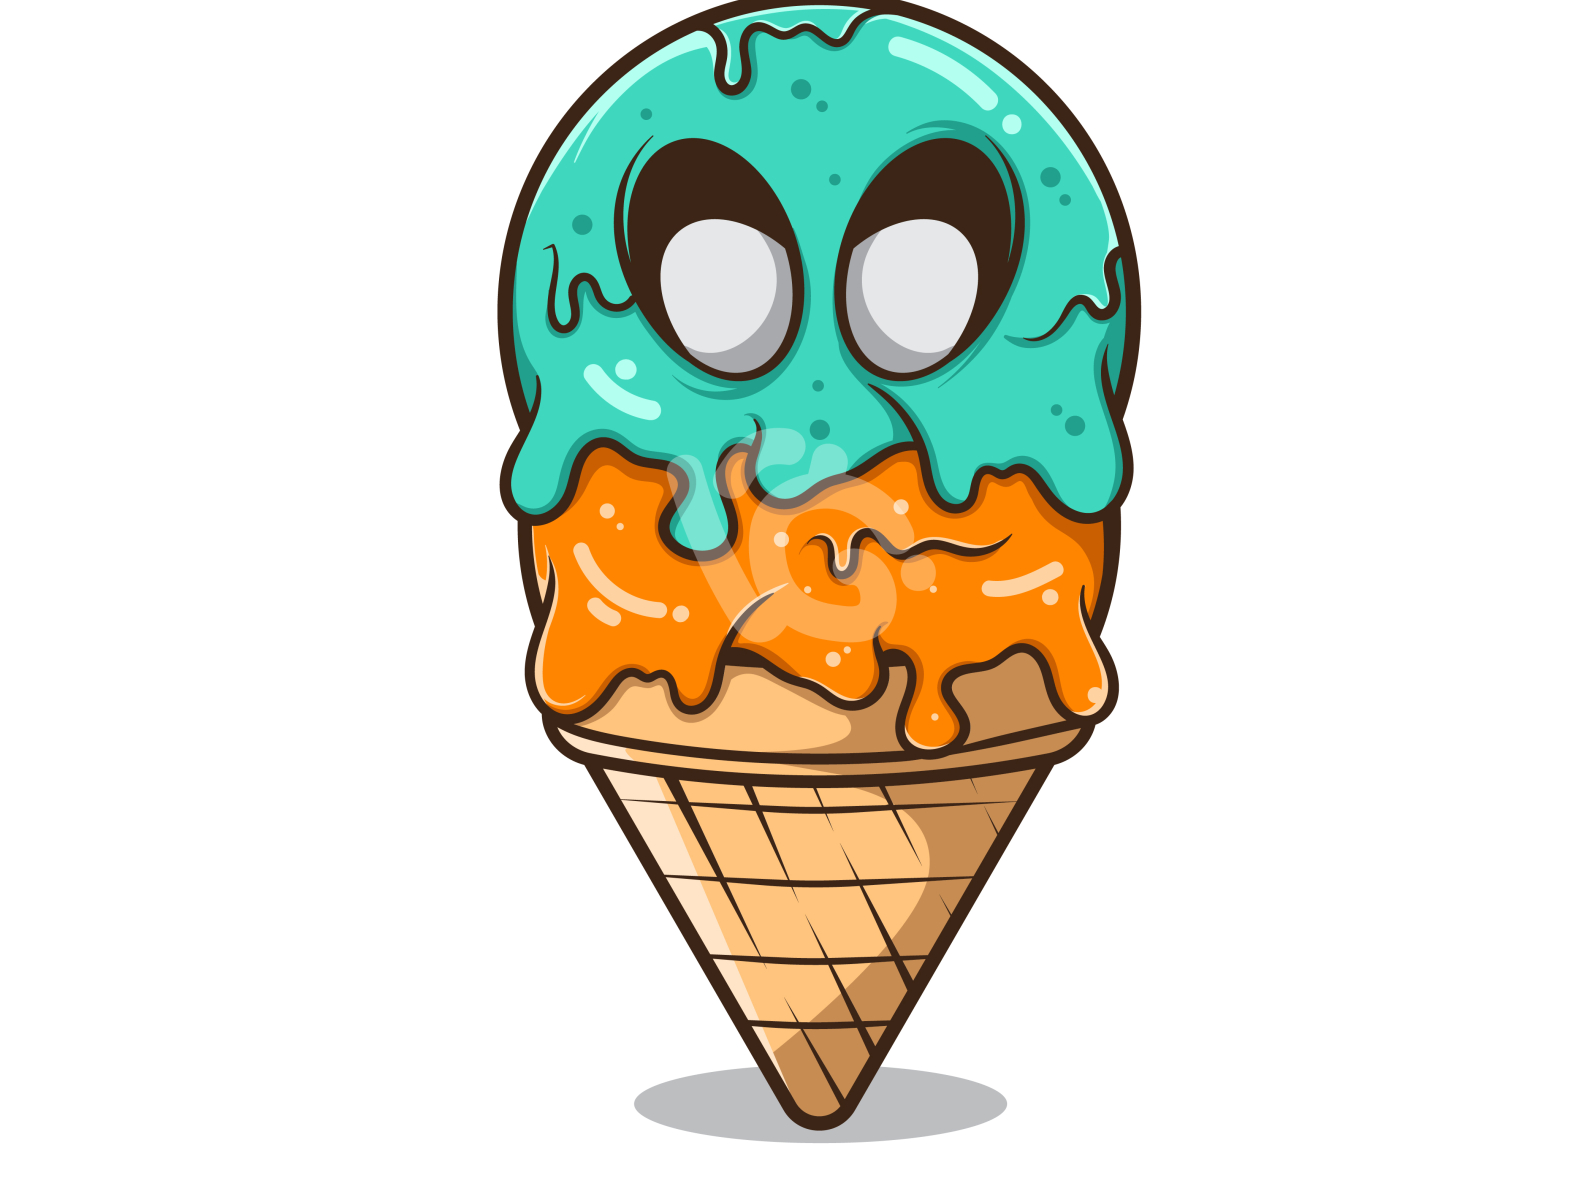 A MELTED ICE CREAM ZOMBIE by GUNKS MORIART on Dribbble